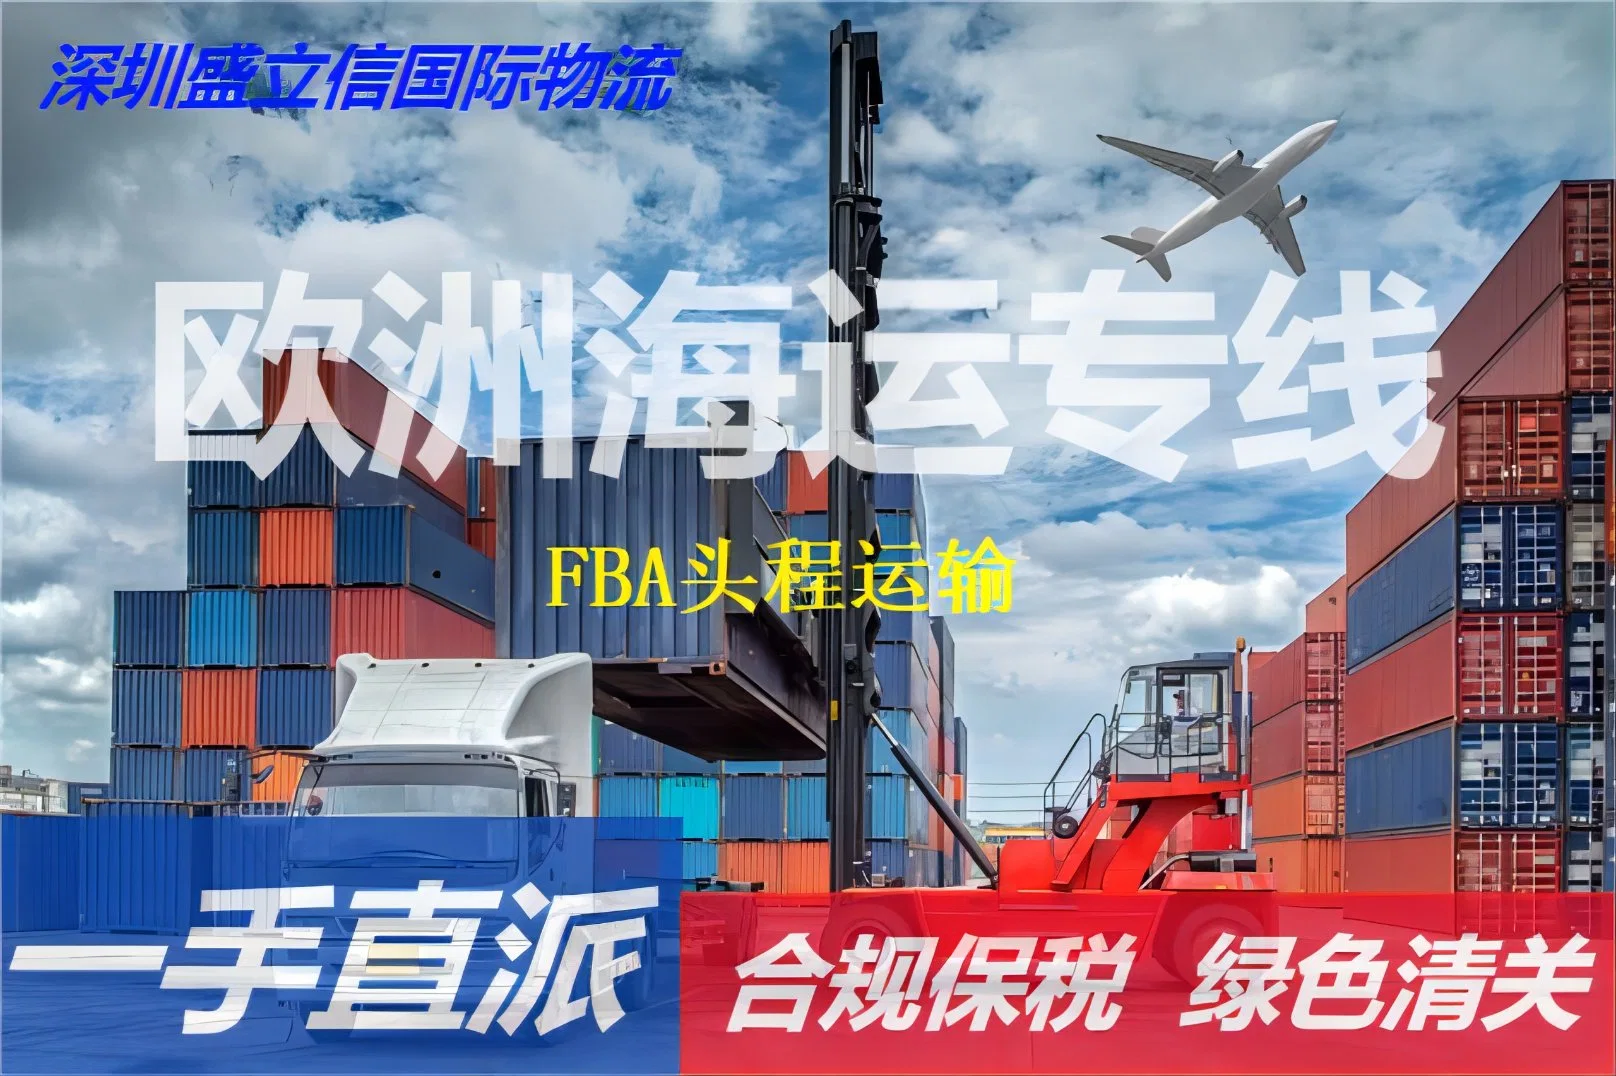 Door to Door Warehouse Logistics Transport Agency Service Sea Freight Agency Service Air Express Freight Agency Service Export to The United States and The Unit